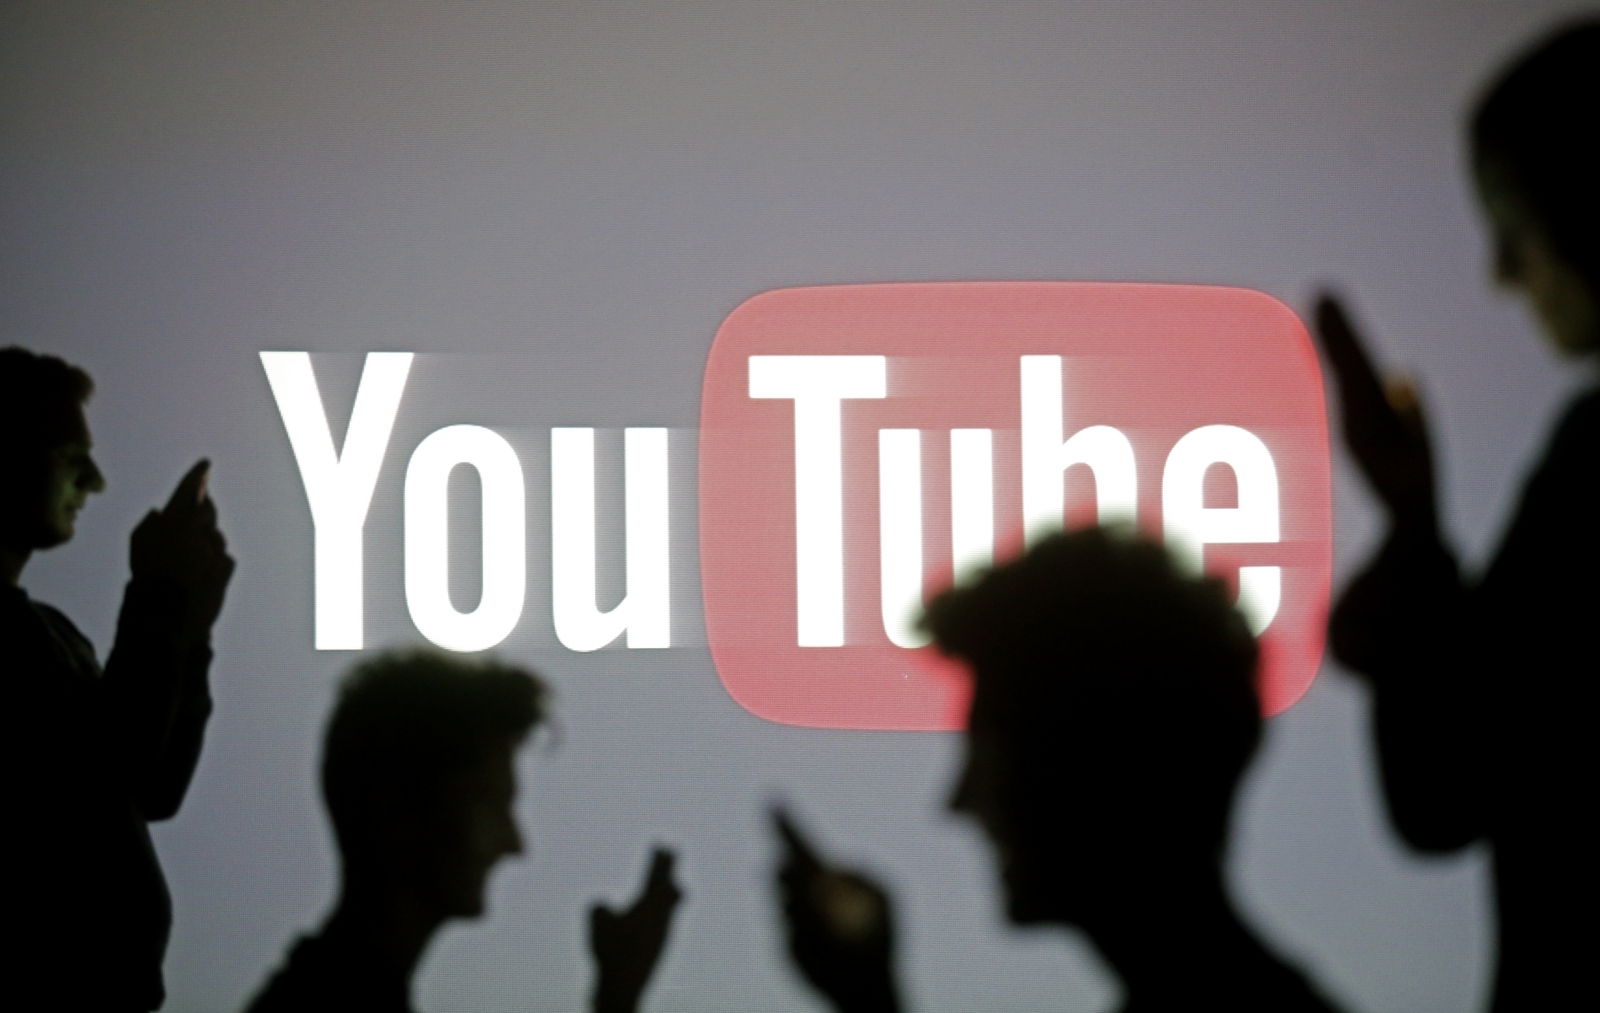 YouTube has a new data saving app, but you can't get it in the UK